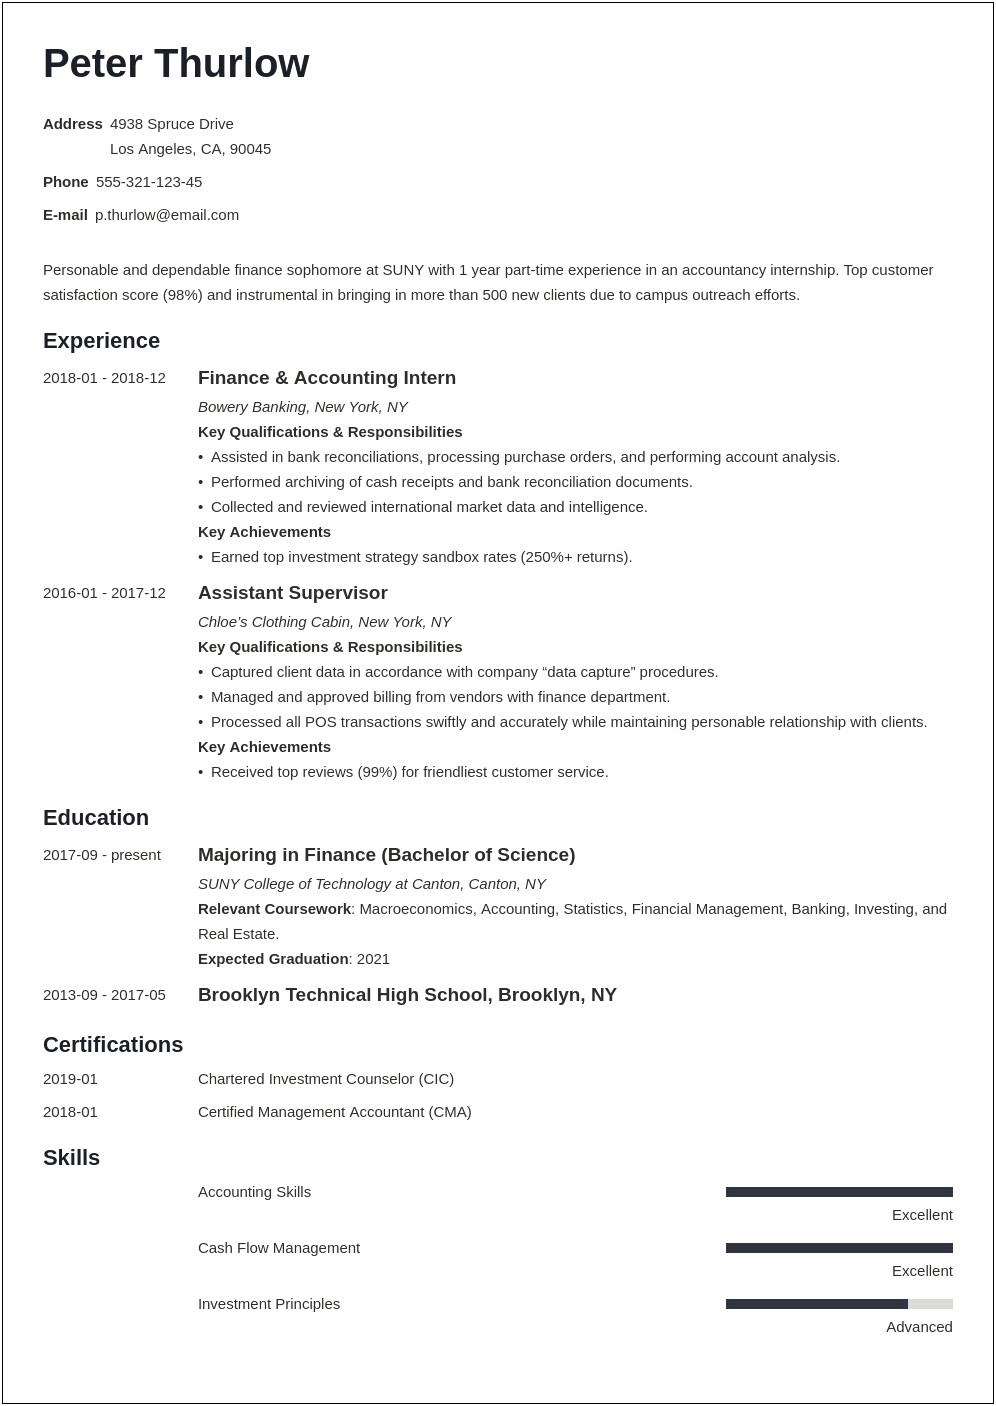 Resume Objective Examples For First Accounting Internship